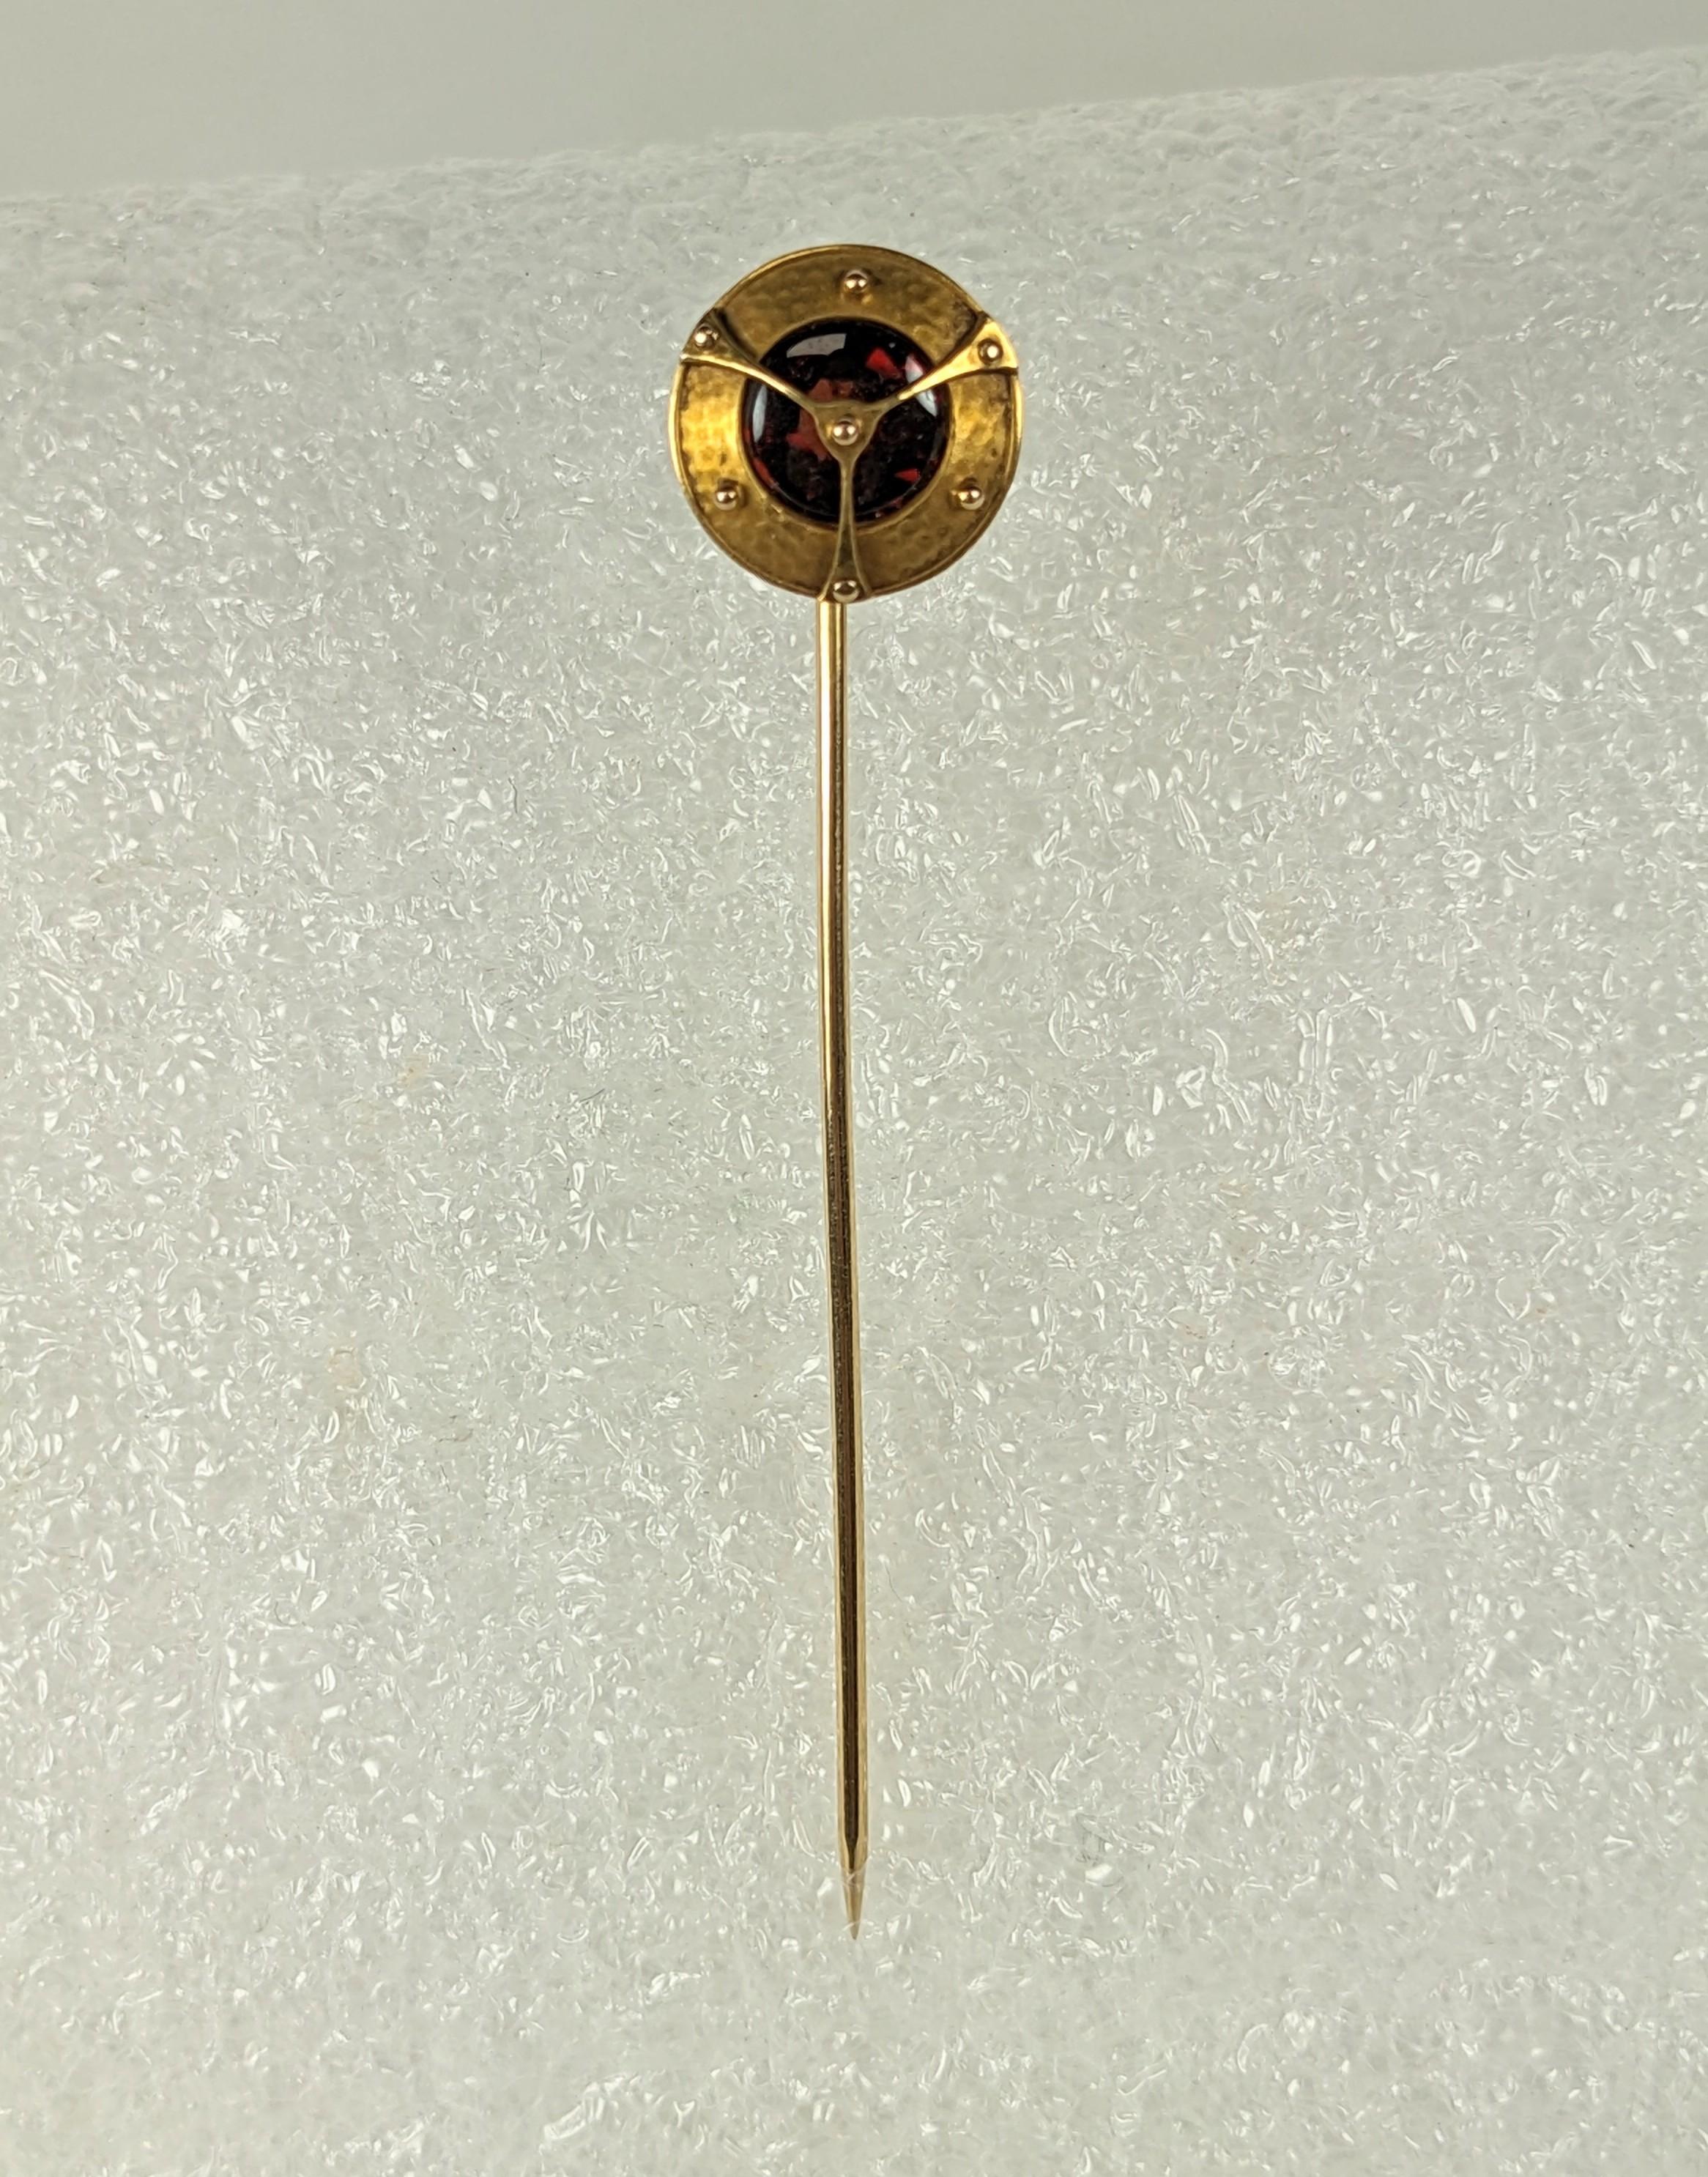 Unusual Arts and Crafts Steampunk Garnet Stickpin in 14k gold. Hand hammered surround with straps laid over a round garnet. Unusual garnet cut in the that the top is cabochon (uncut) and the back is faceted so that when the light hits, it flickers